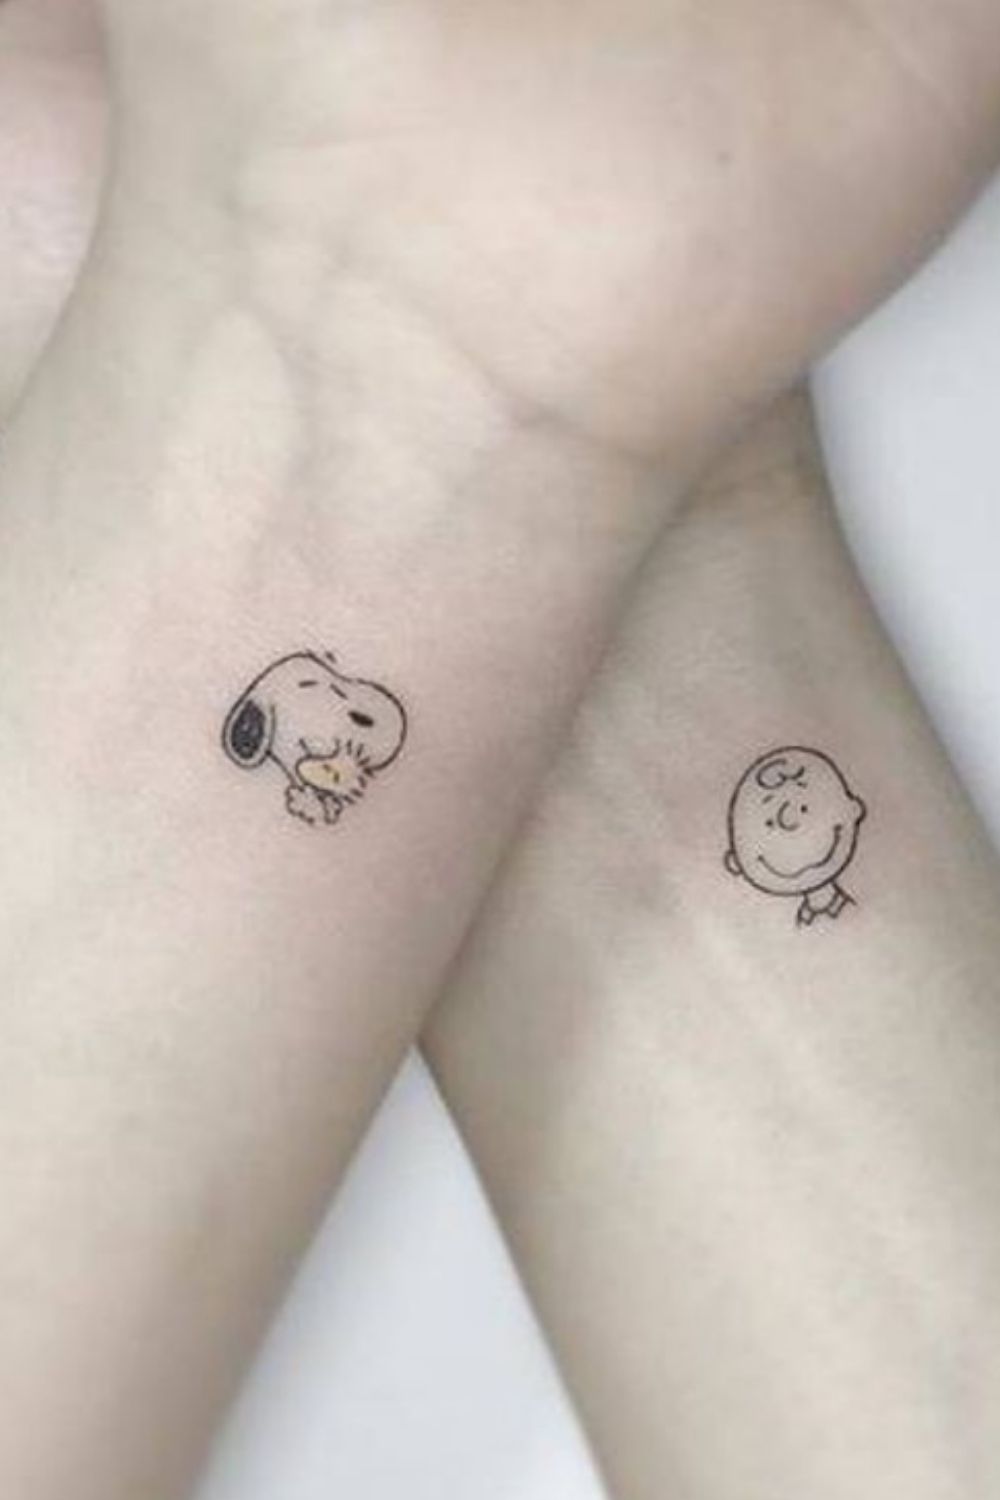 Best friend tattoo | tattoos to Celebrate your special bond